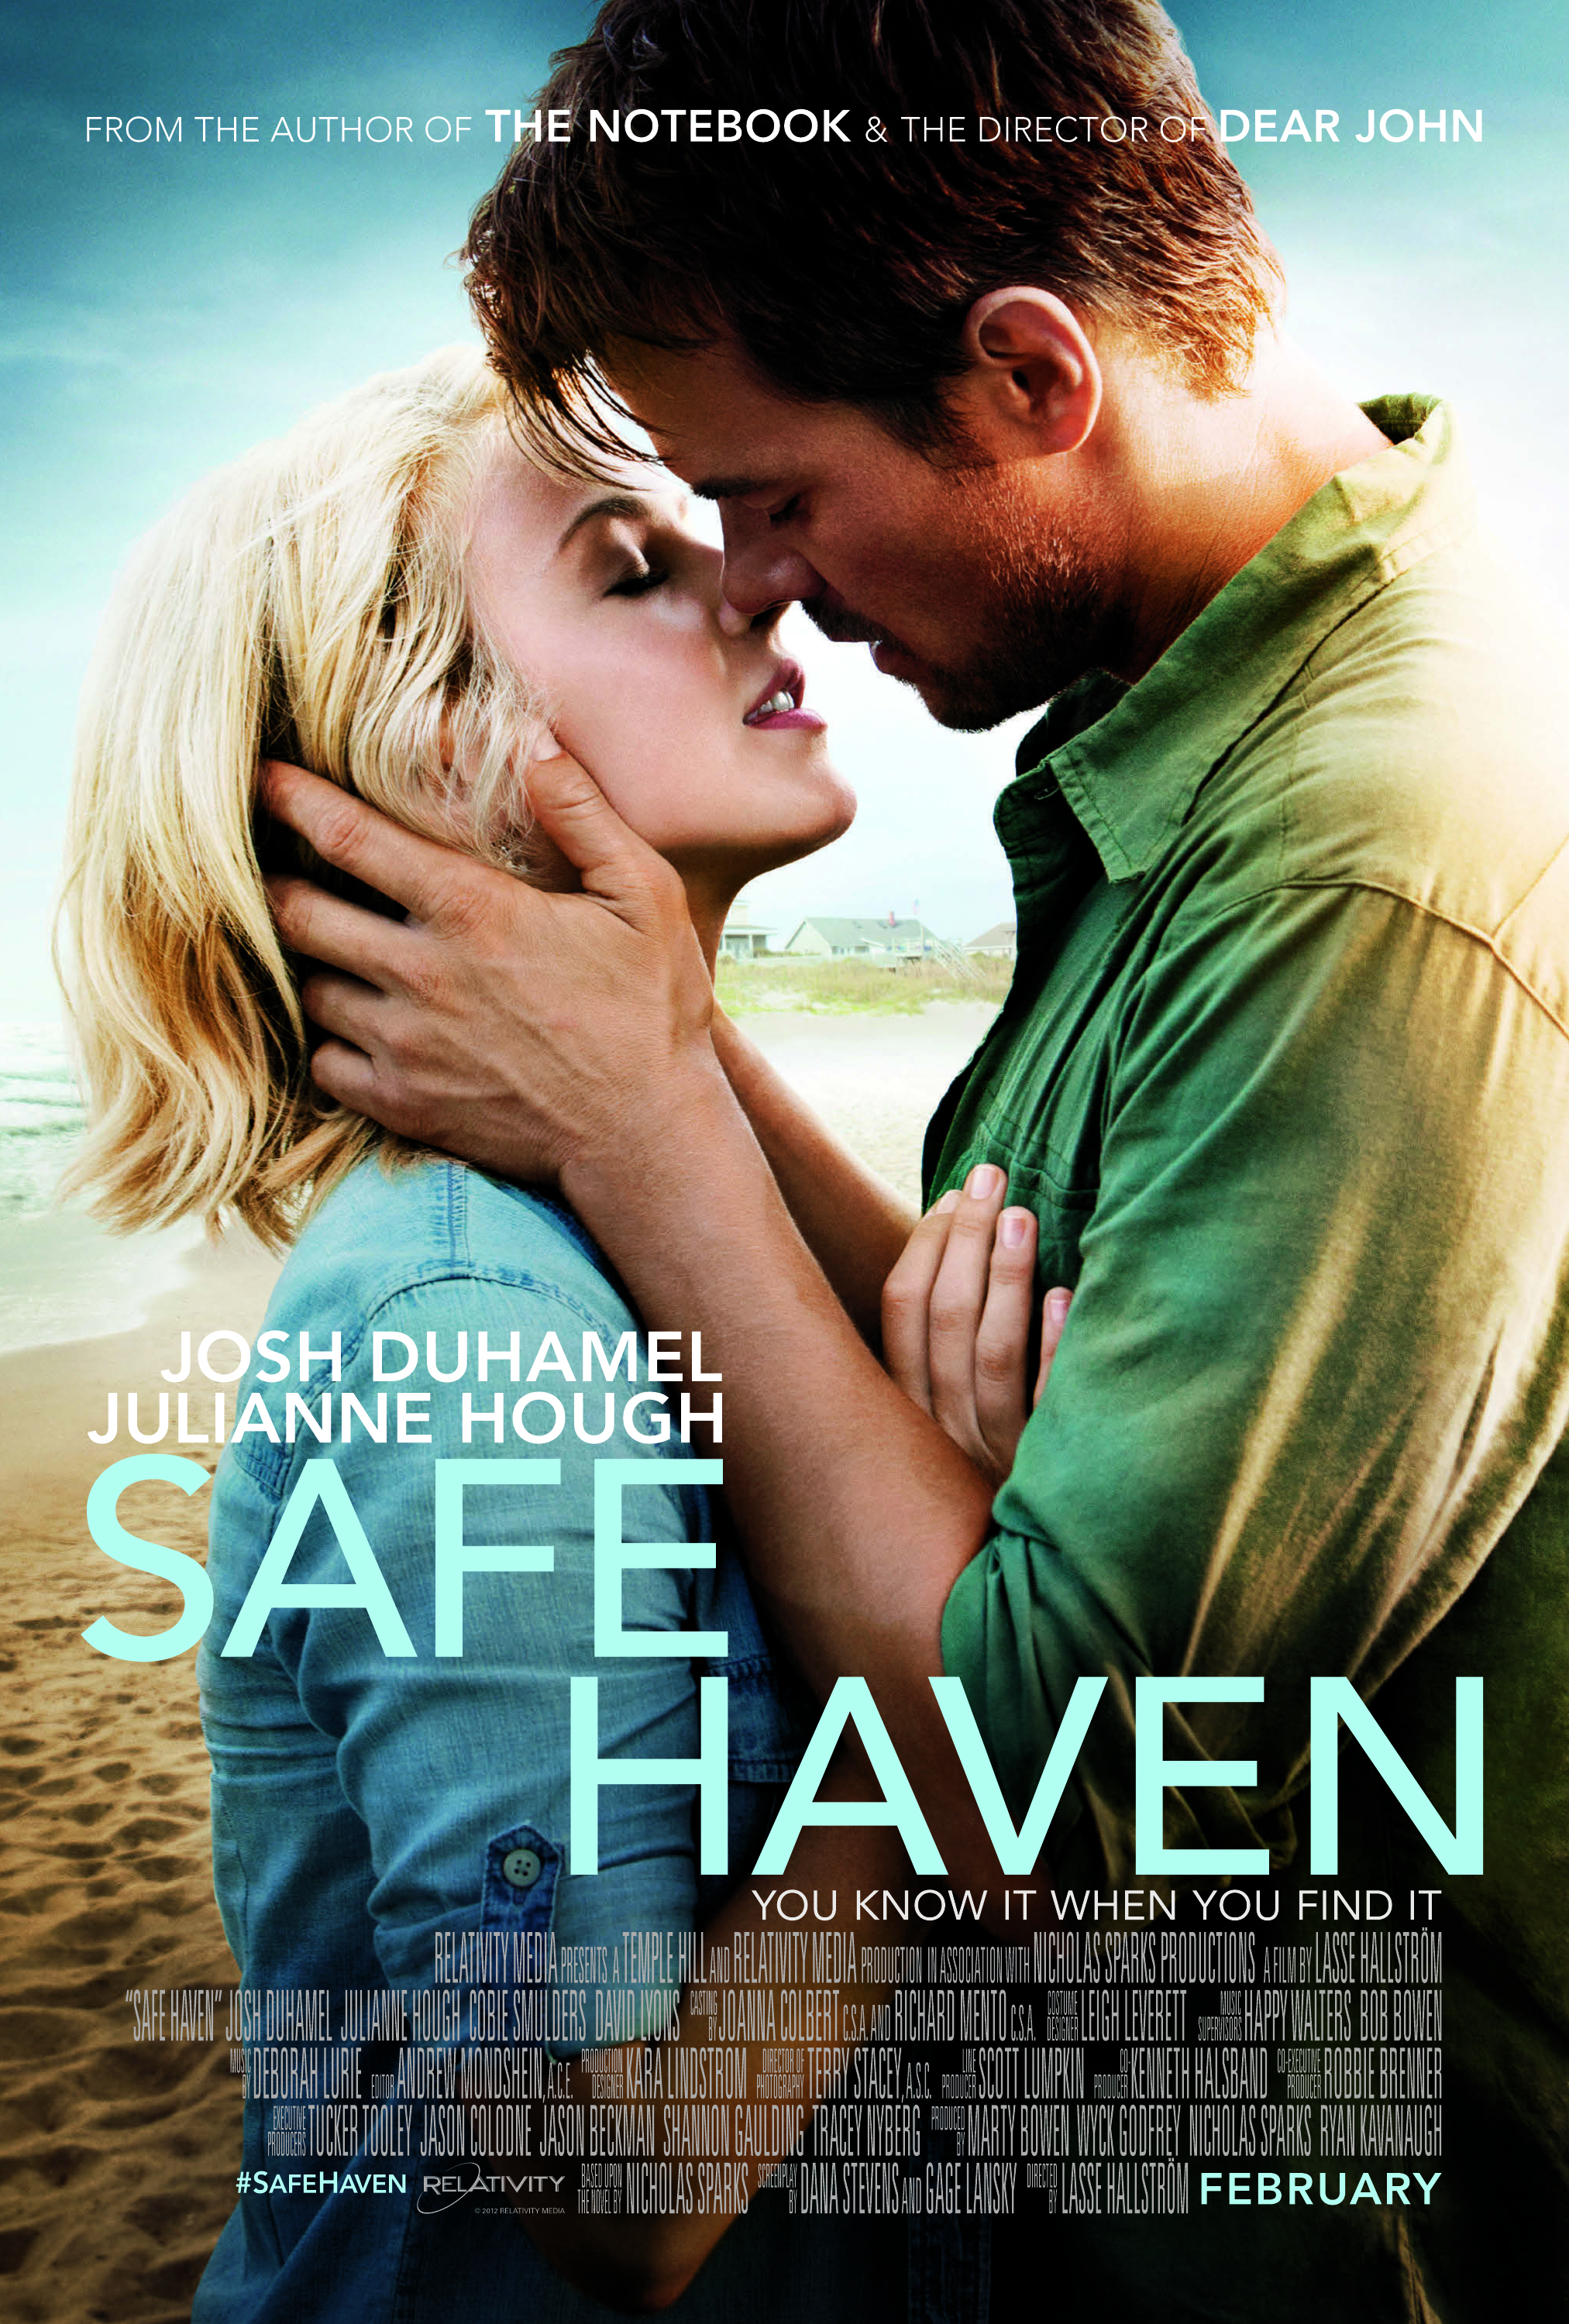 http://cdn.sheknows.com/articles/2012/10/safe-haven-exclusive-poster.jpg